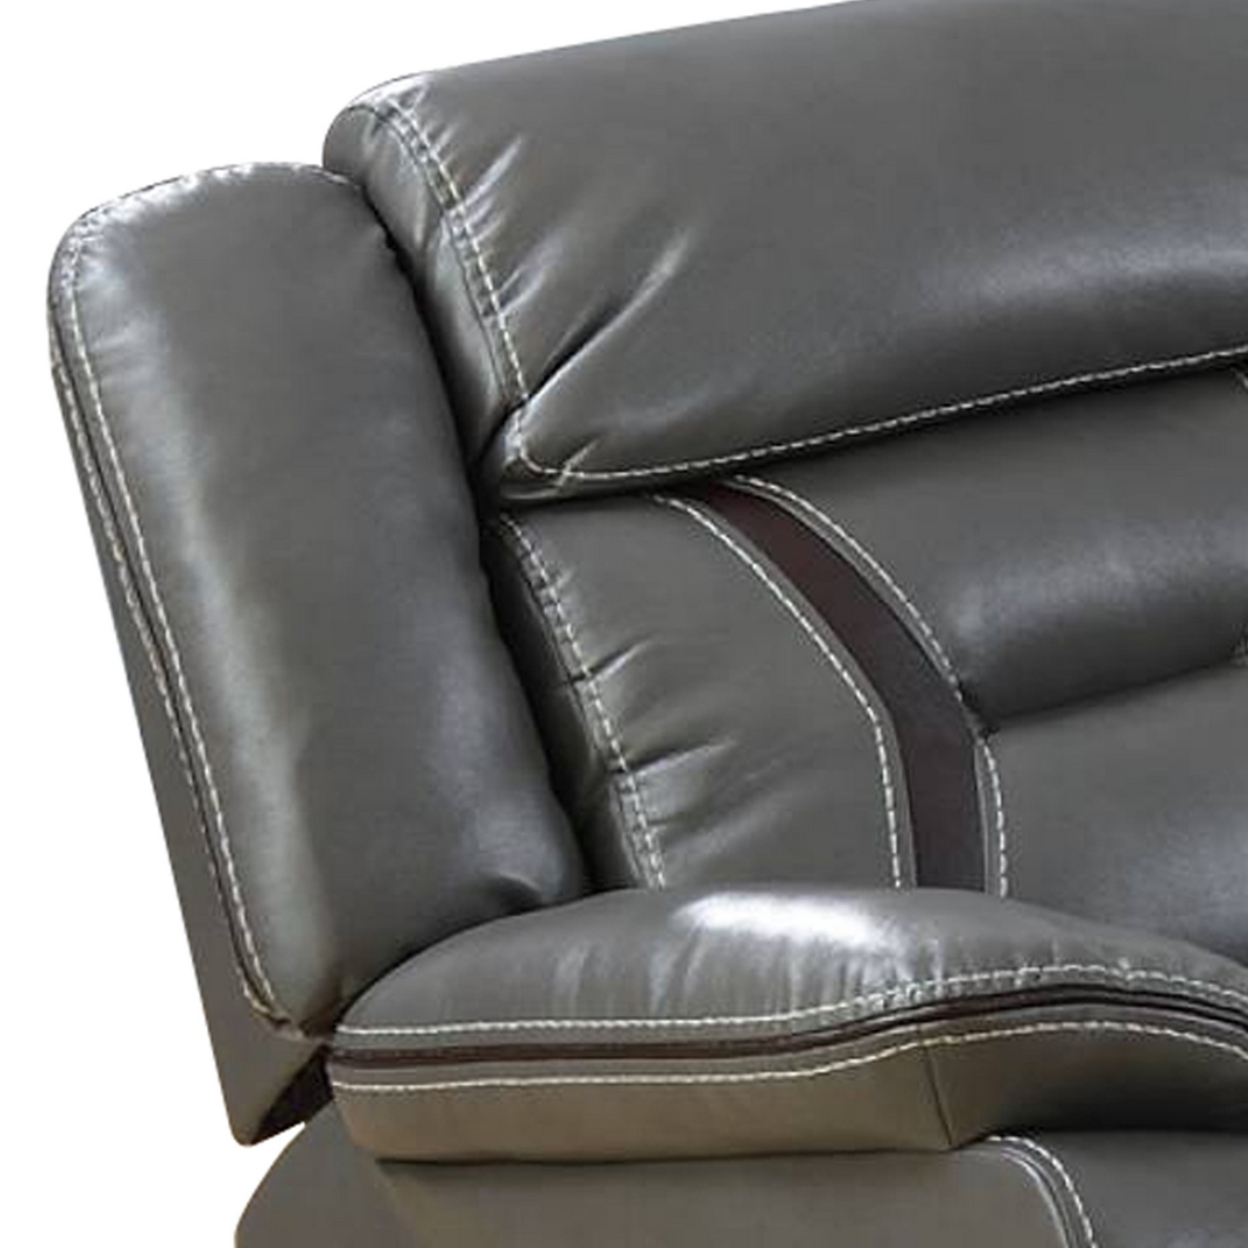 37 Inches Leatherette Glider Recliner With Pillow Arms, Gray- Saltoro Sherpi